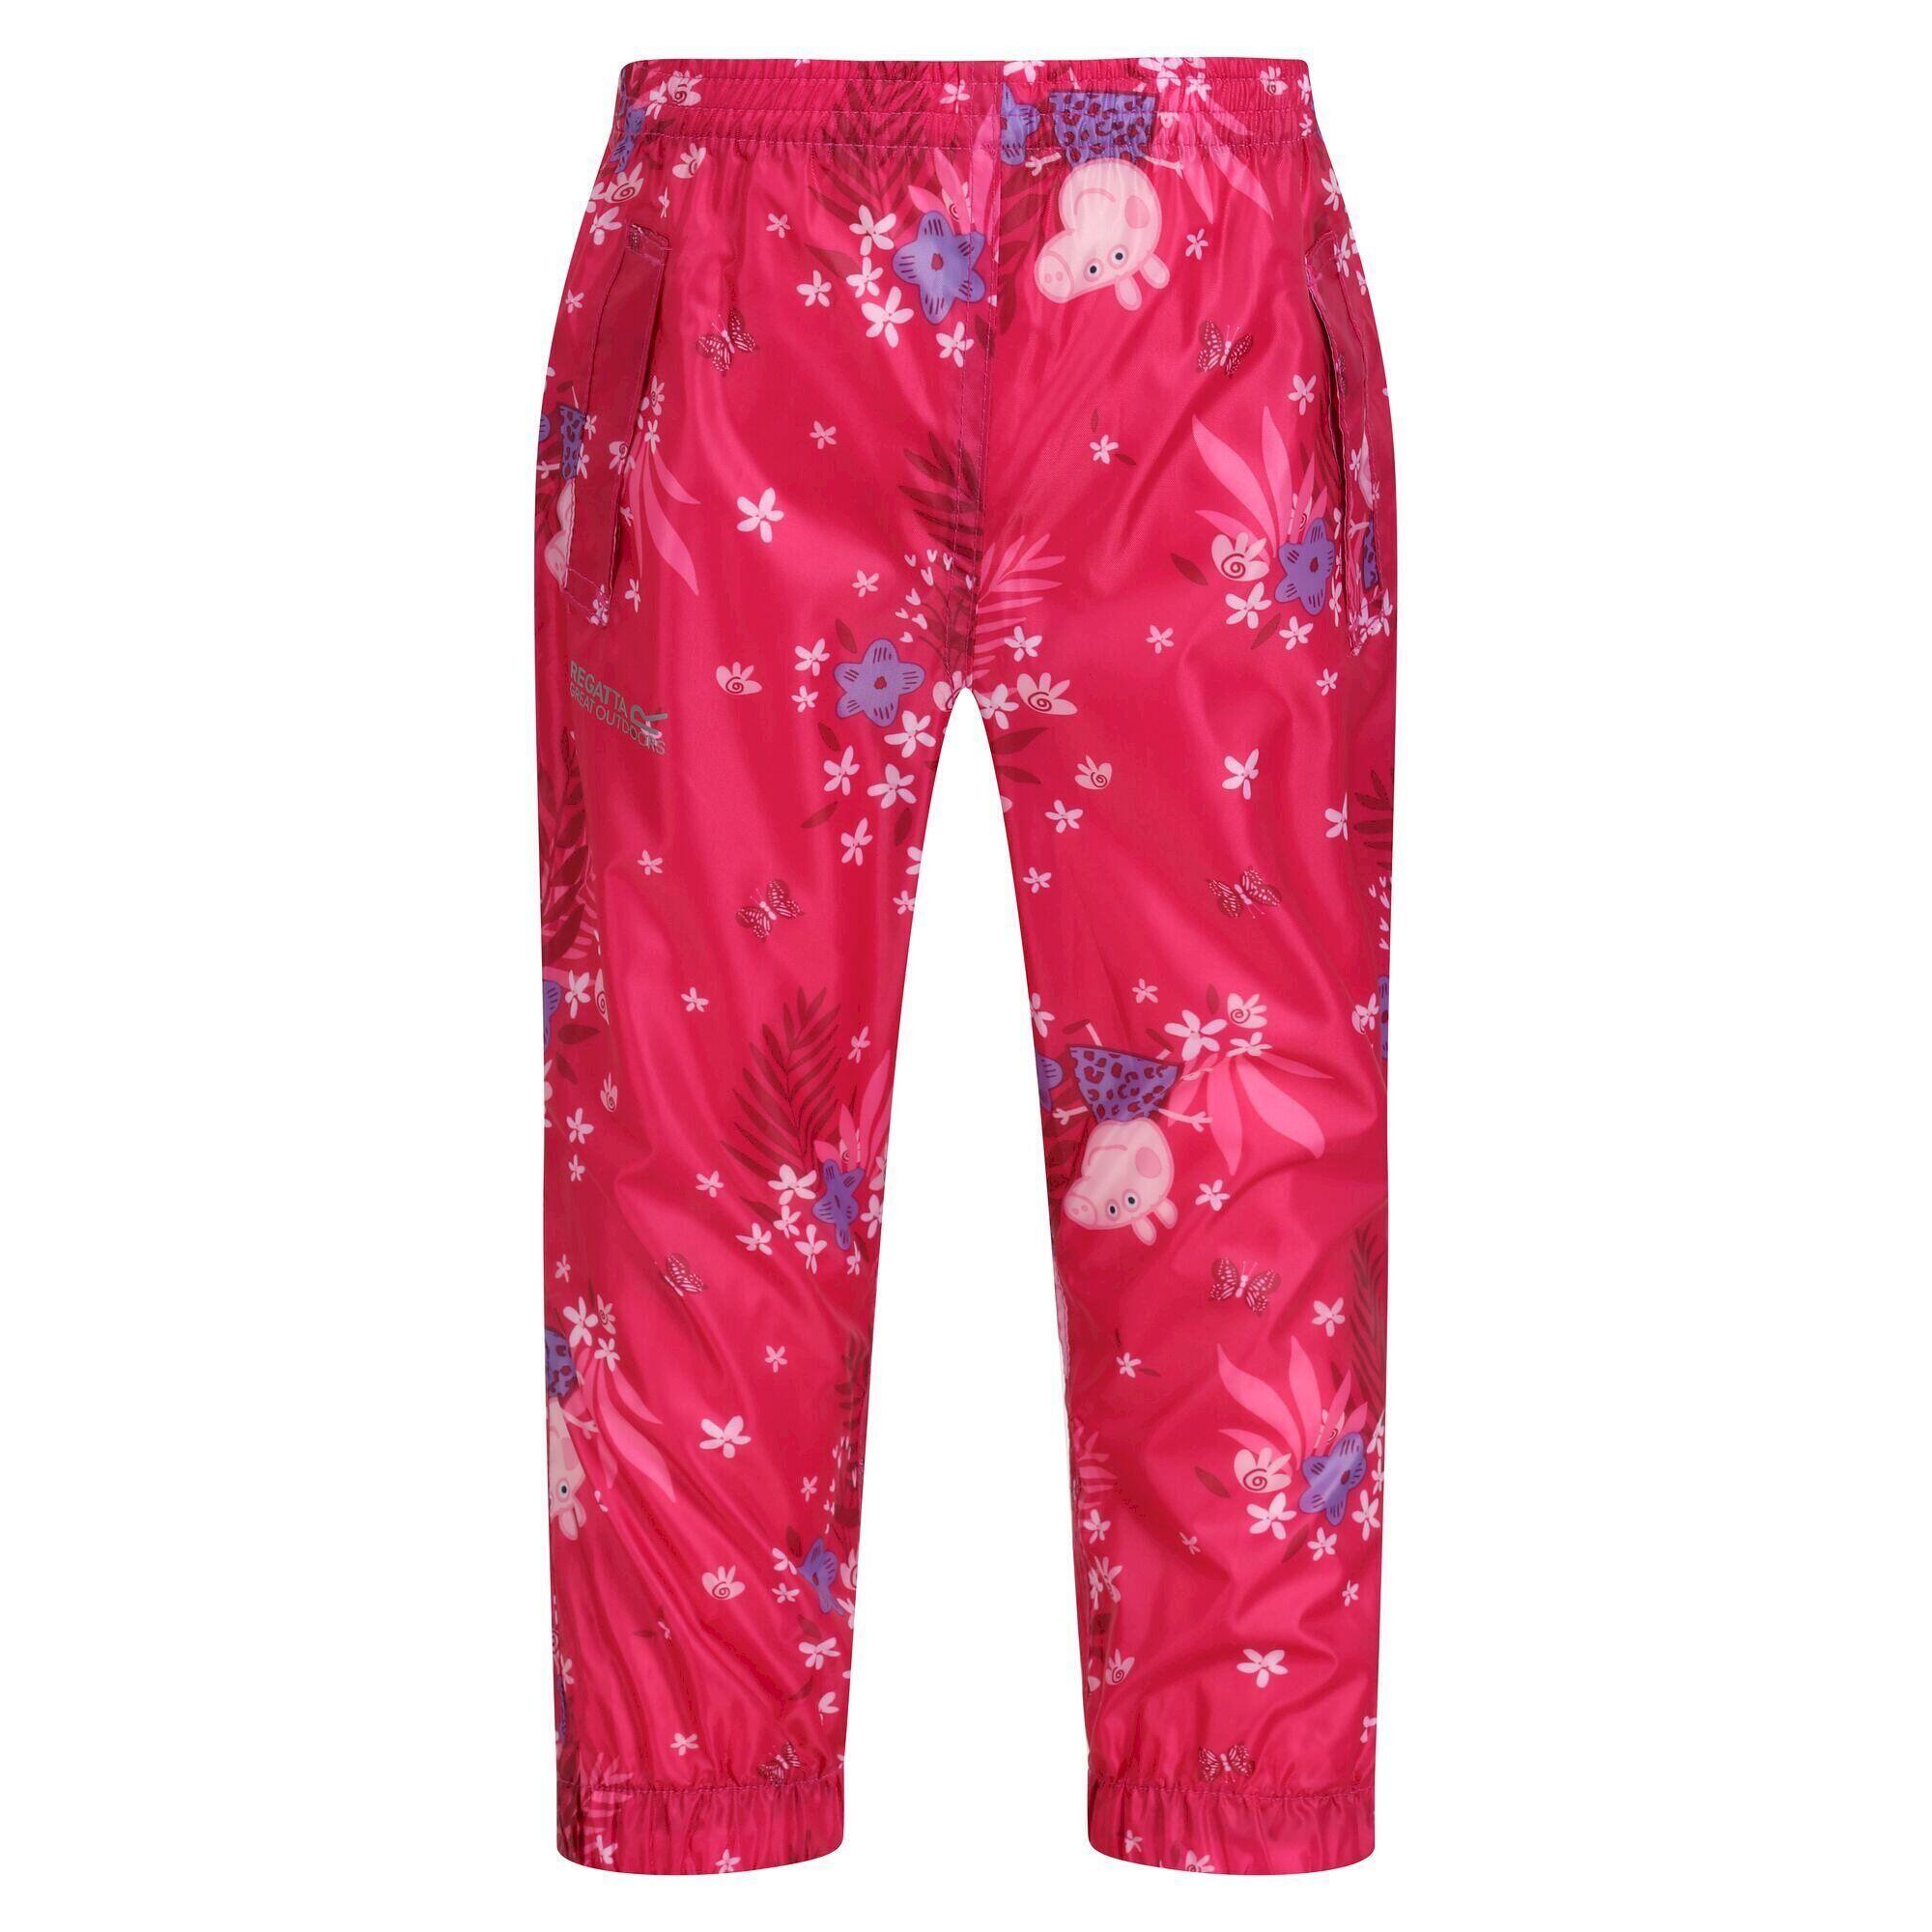 REGATTA Childrens/Kids Pack It Floral Peppa Pig Waterproof Over Trousers (Pink Fusion)